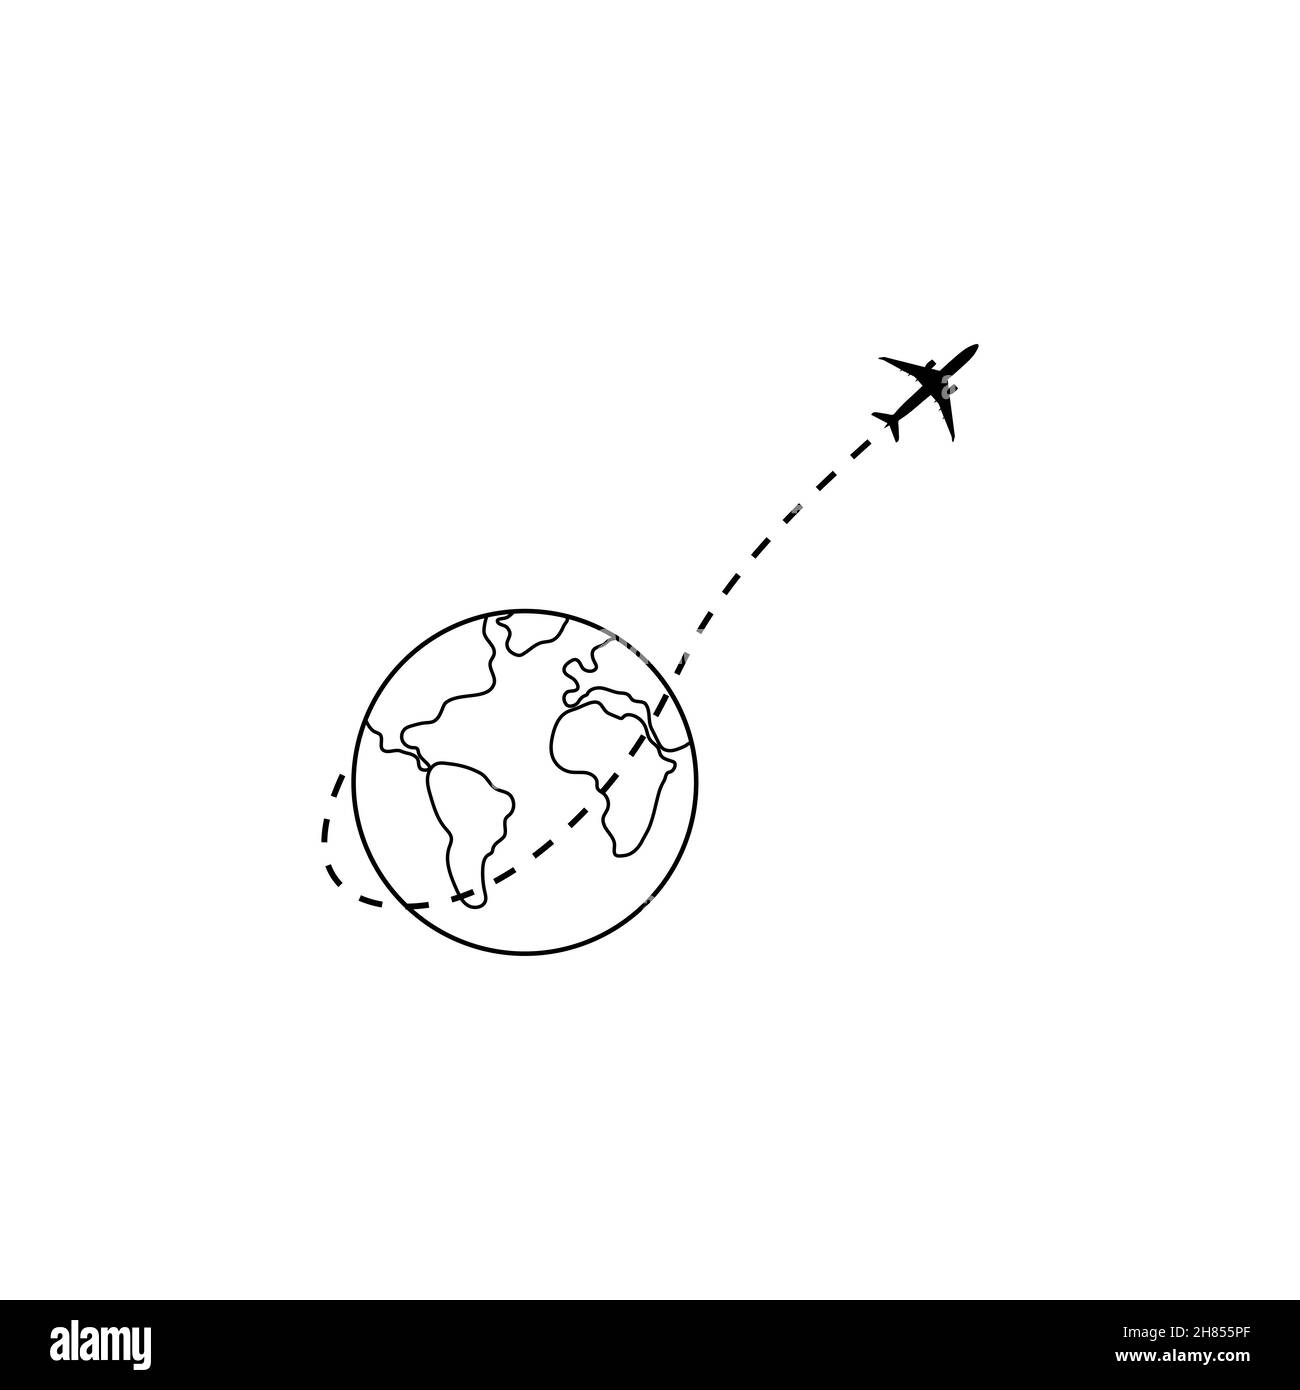 Dotted line of the aircraft route around the planet Earth. Tourism and ...